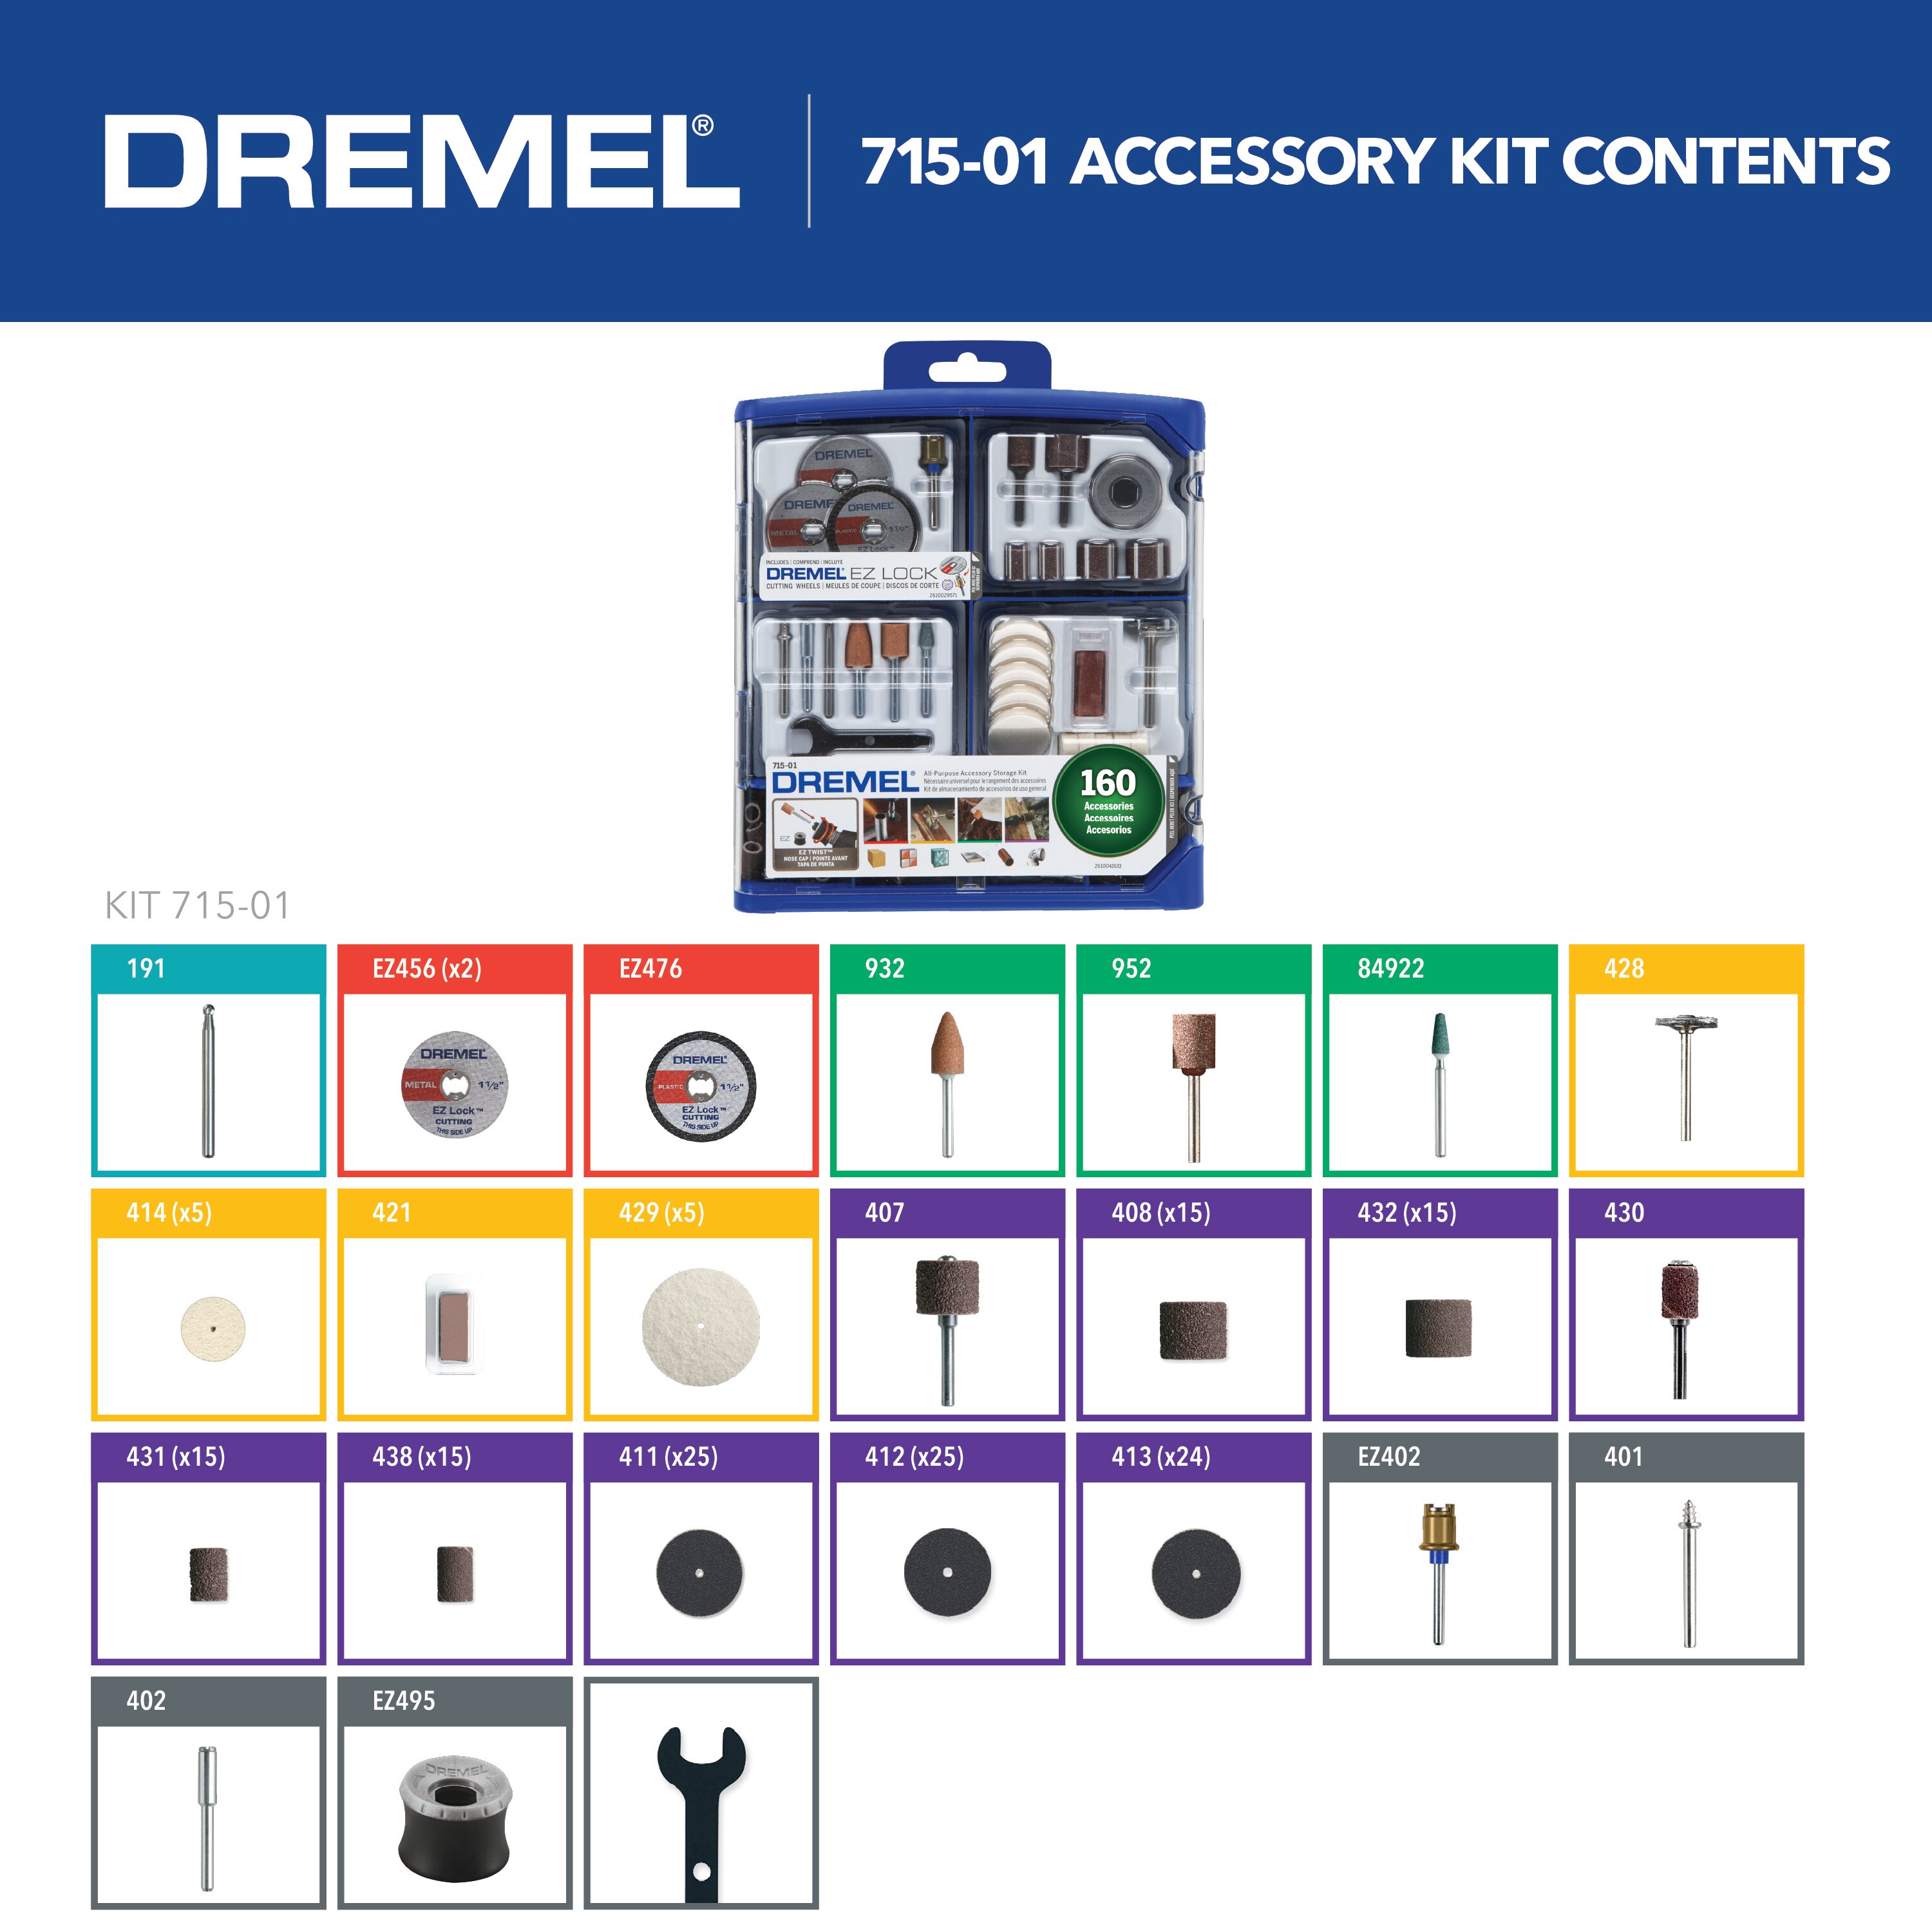 Dremel 4000/4-34 4 Attachments, 34 Accessories Variable Speed Rotary Tool -  MRO Tools